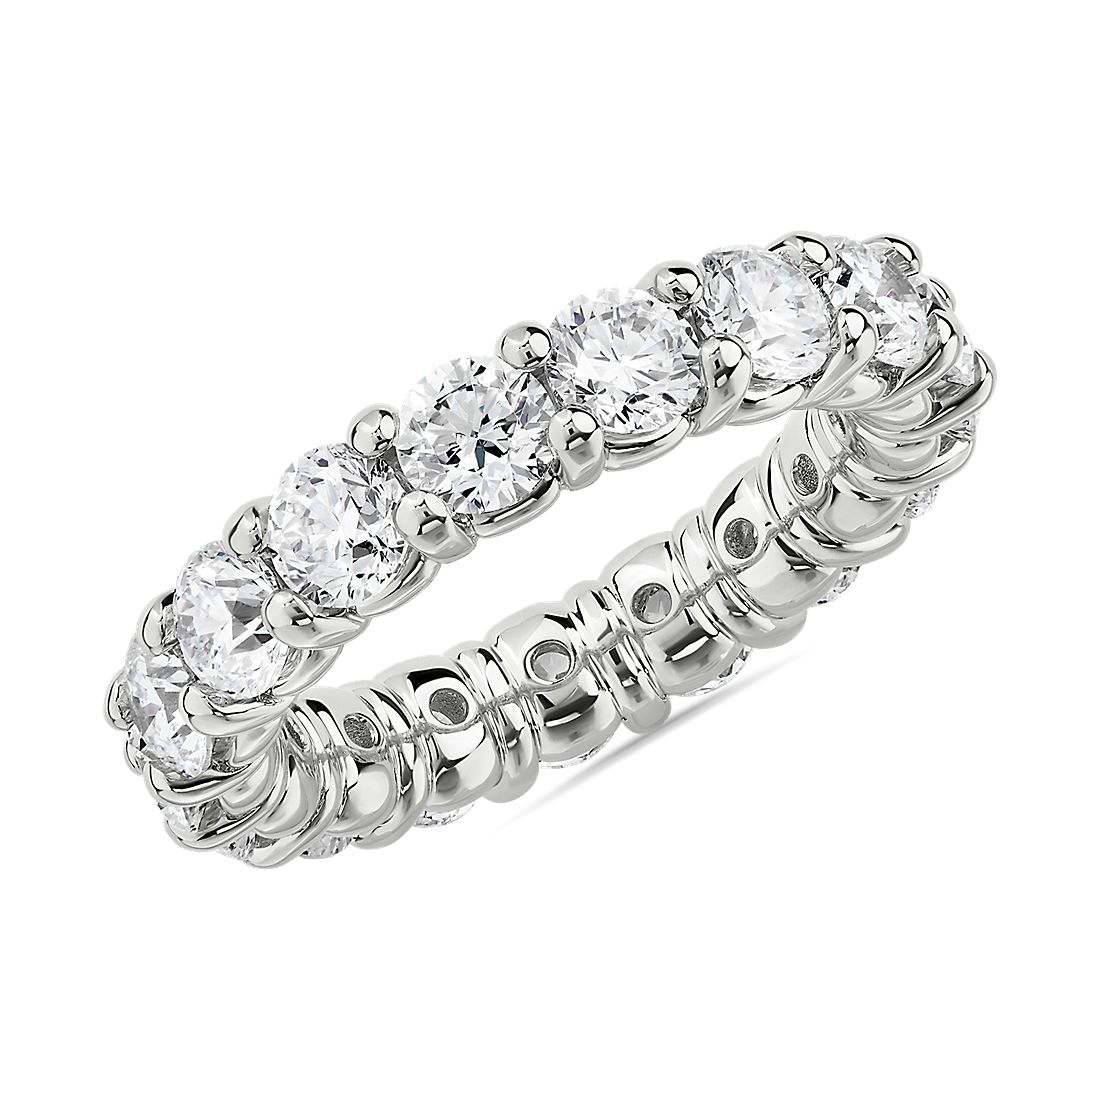 Comfort Fit Round Brilliant Diamond Eternity Ring in 18k White Gold (3.68 ct. tw.)